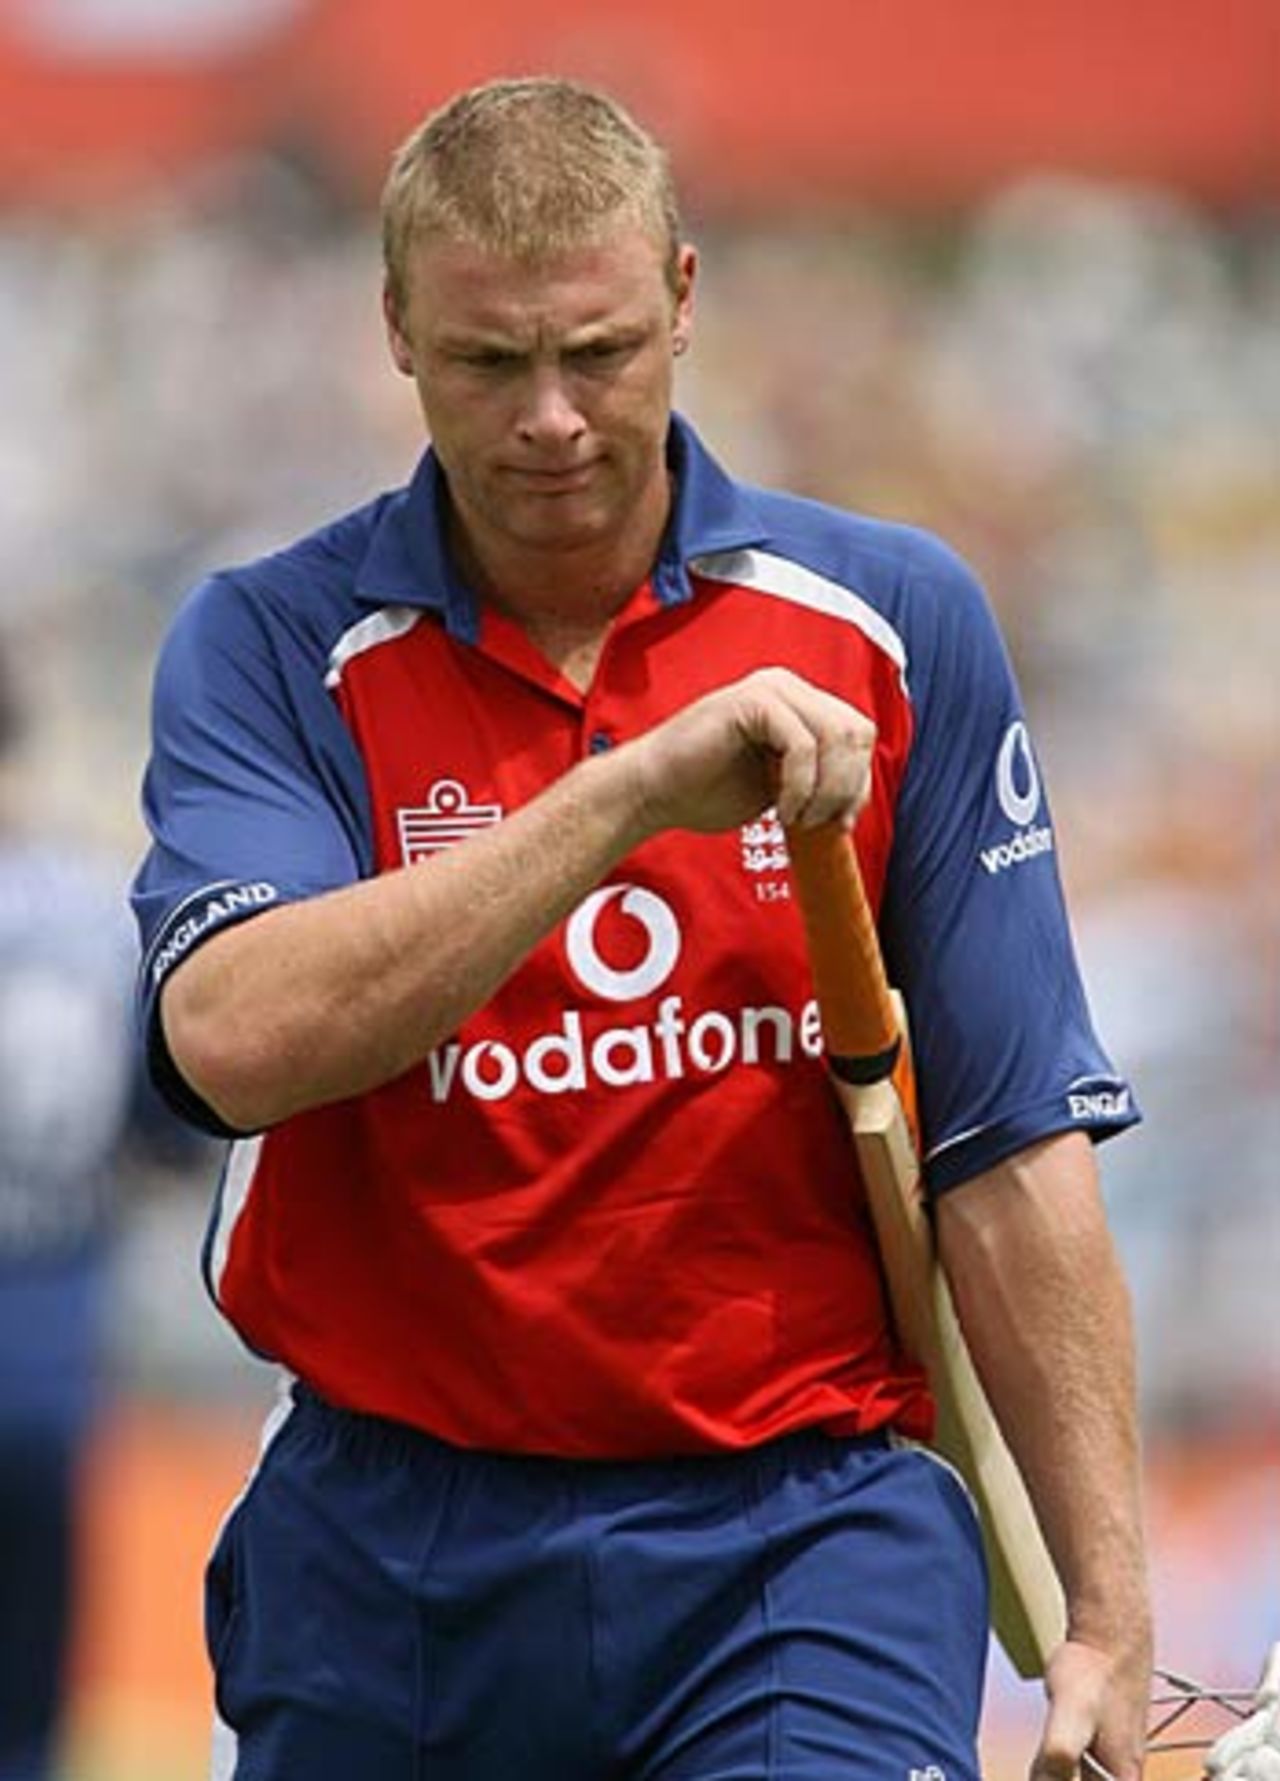 Andrew Flintoff made 45 less in his 100th ODI than in his first, India v England, 2nd ODI, Faridabad, March 31, 2006